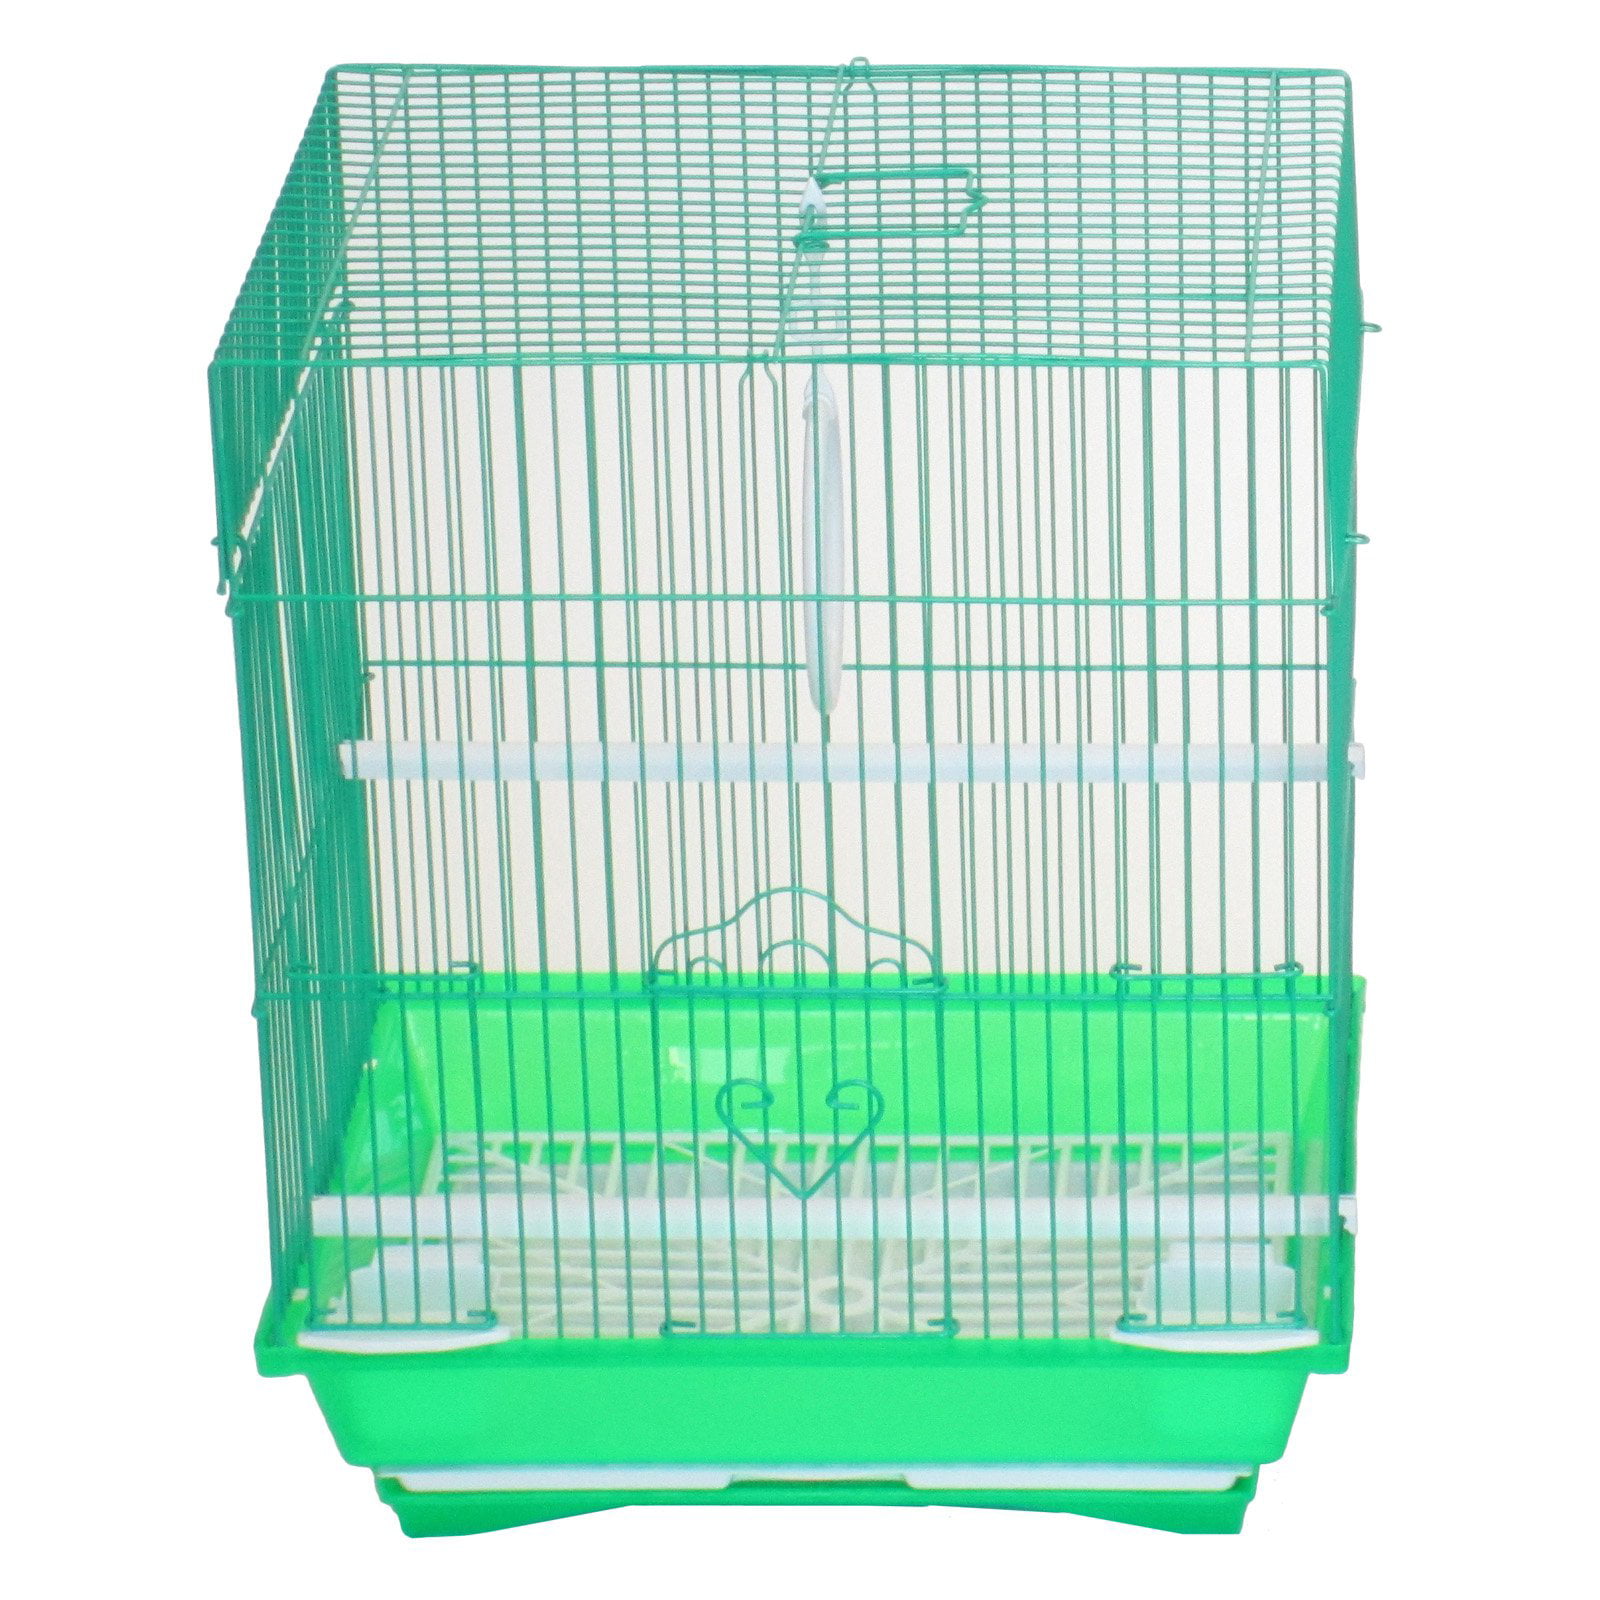 Flat cage. Cage Top.